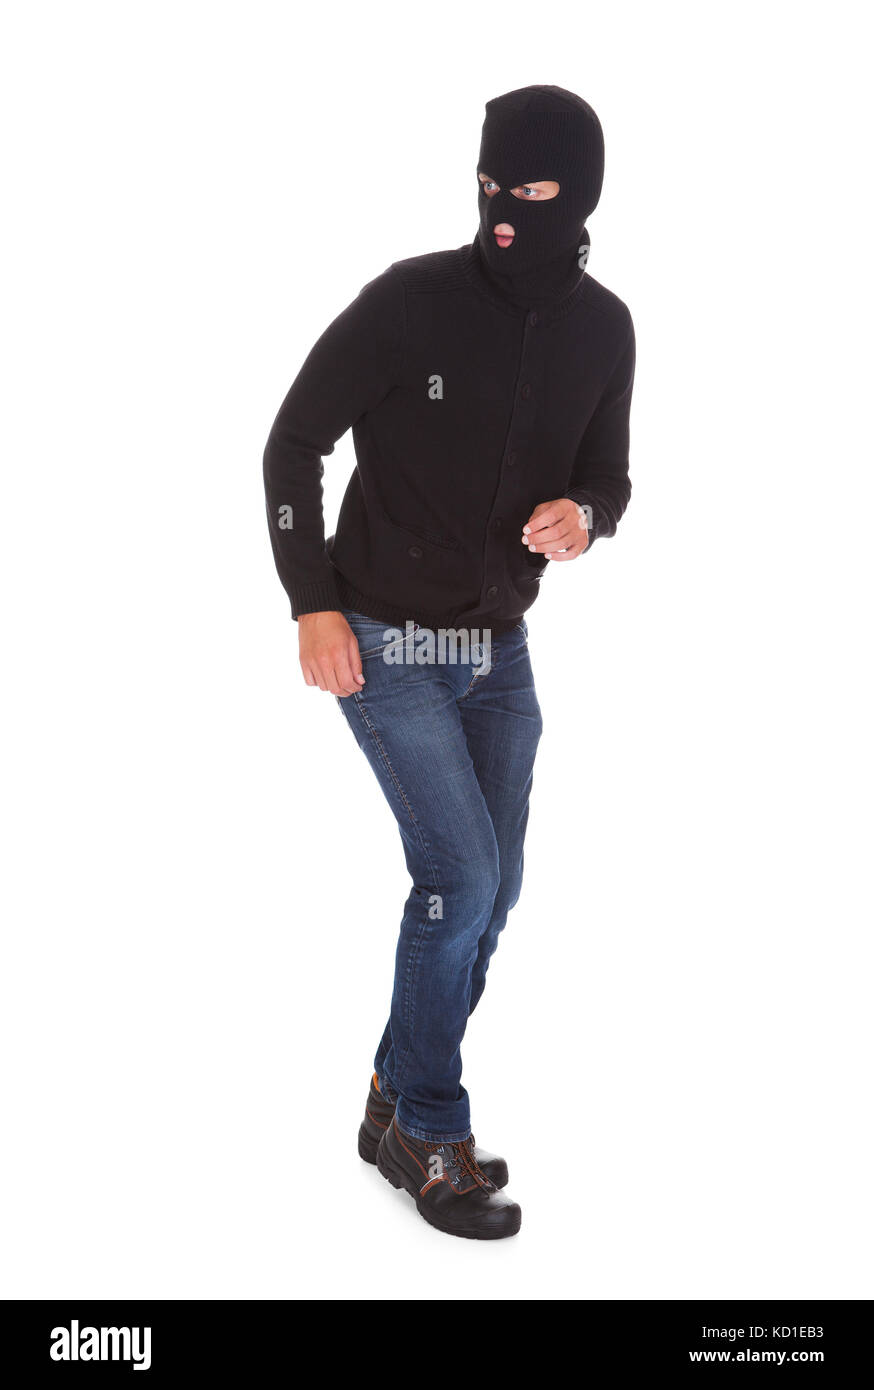 Portrait Of A Burglar Standing Isolated On White Background Stock Photo